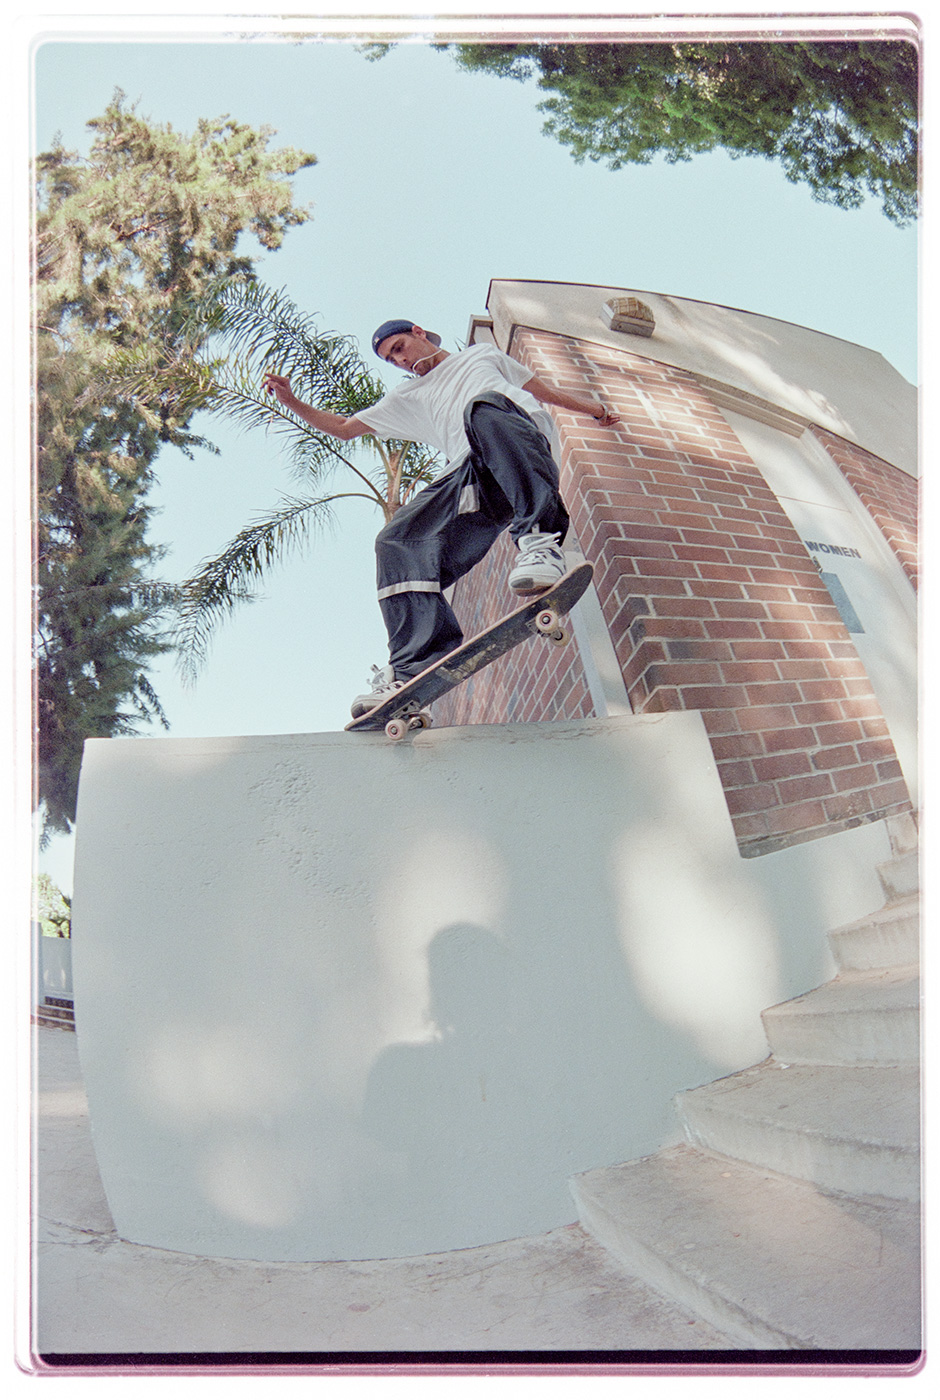 Guy Mariano switch crooked grinds the Tampa Ledge in LA for Mike Blabac's lens in 1998. This was Jack Curtin's photo pick for his 